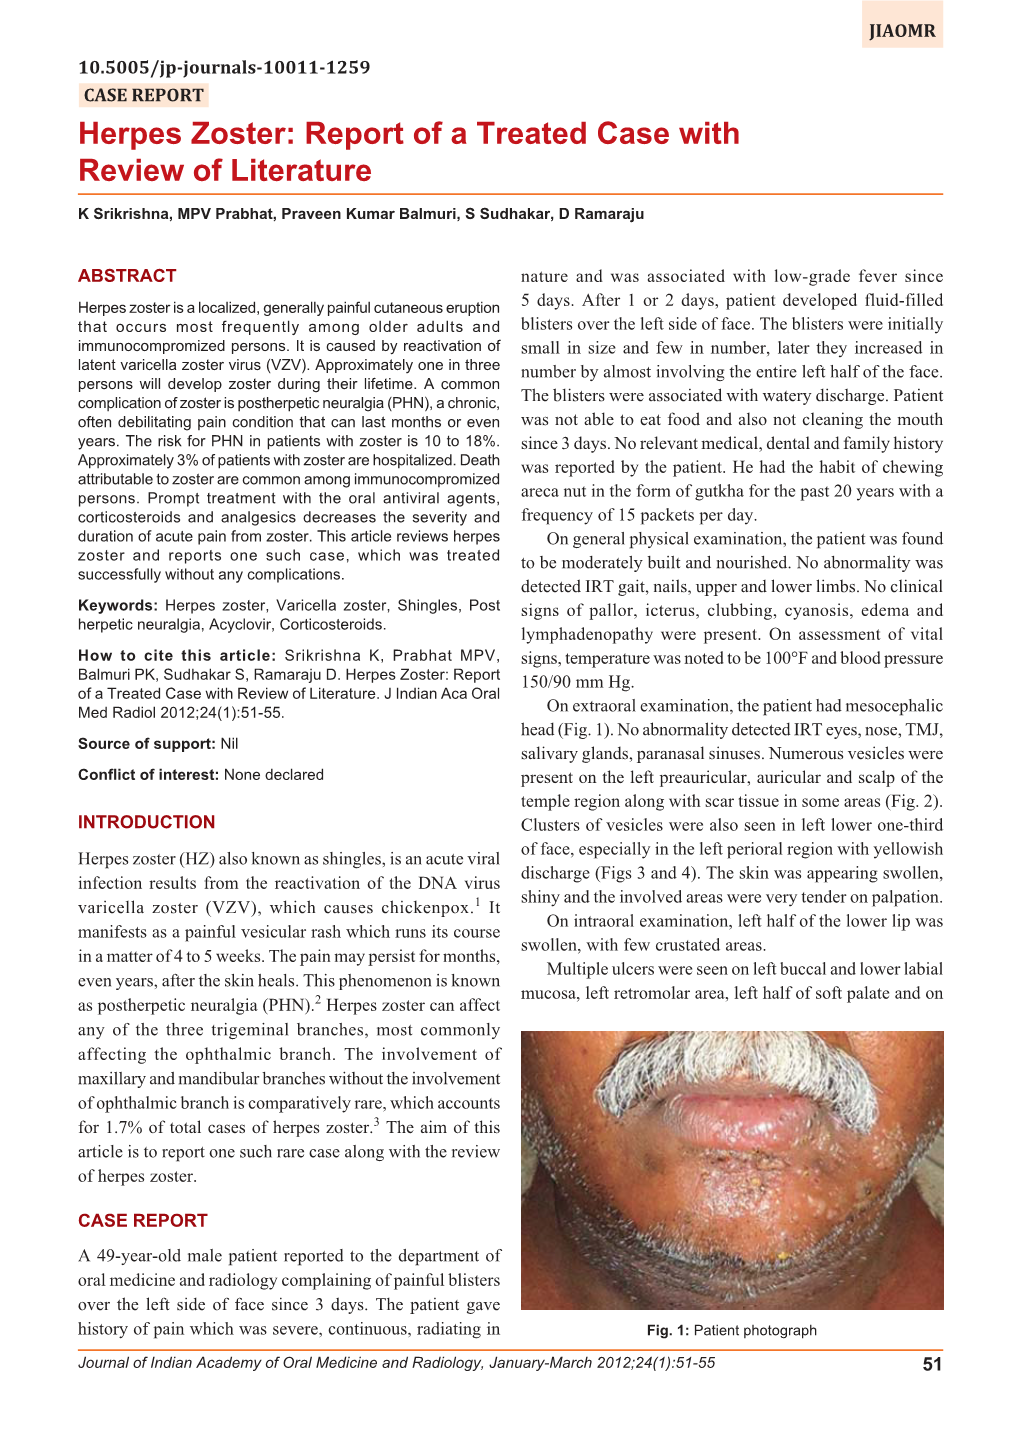 Herpes Zoster: Report of a Treated Case with Review of Literature Herpes Zoster: Report of a Treated Case with Review of Literature